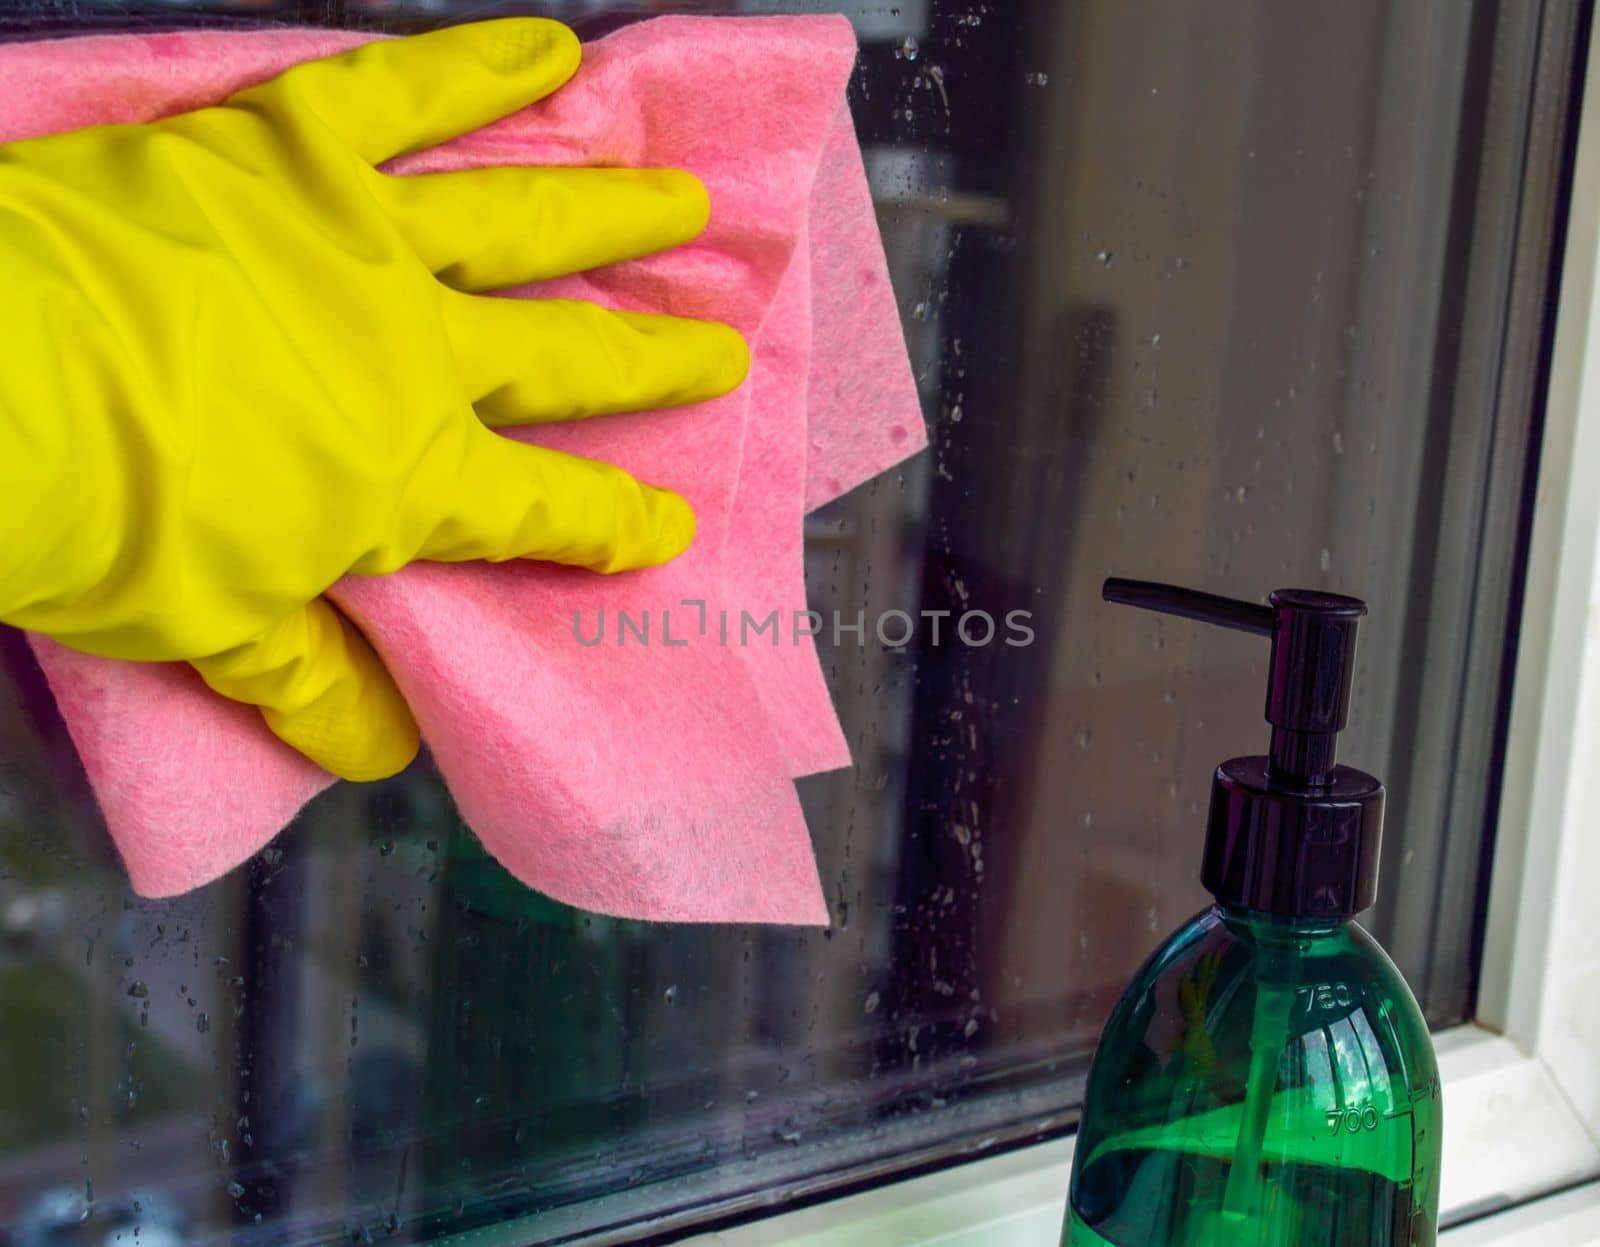 Window washing. In the photo, a hand in a rubber glove with a rag washes a window.